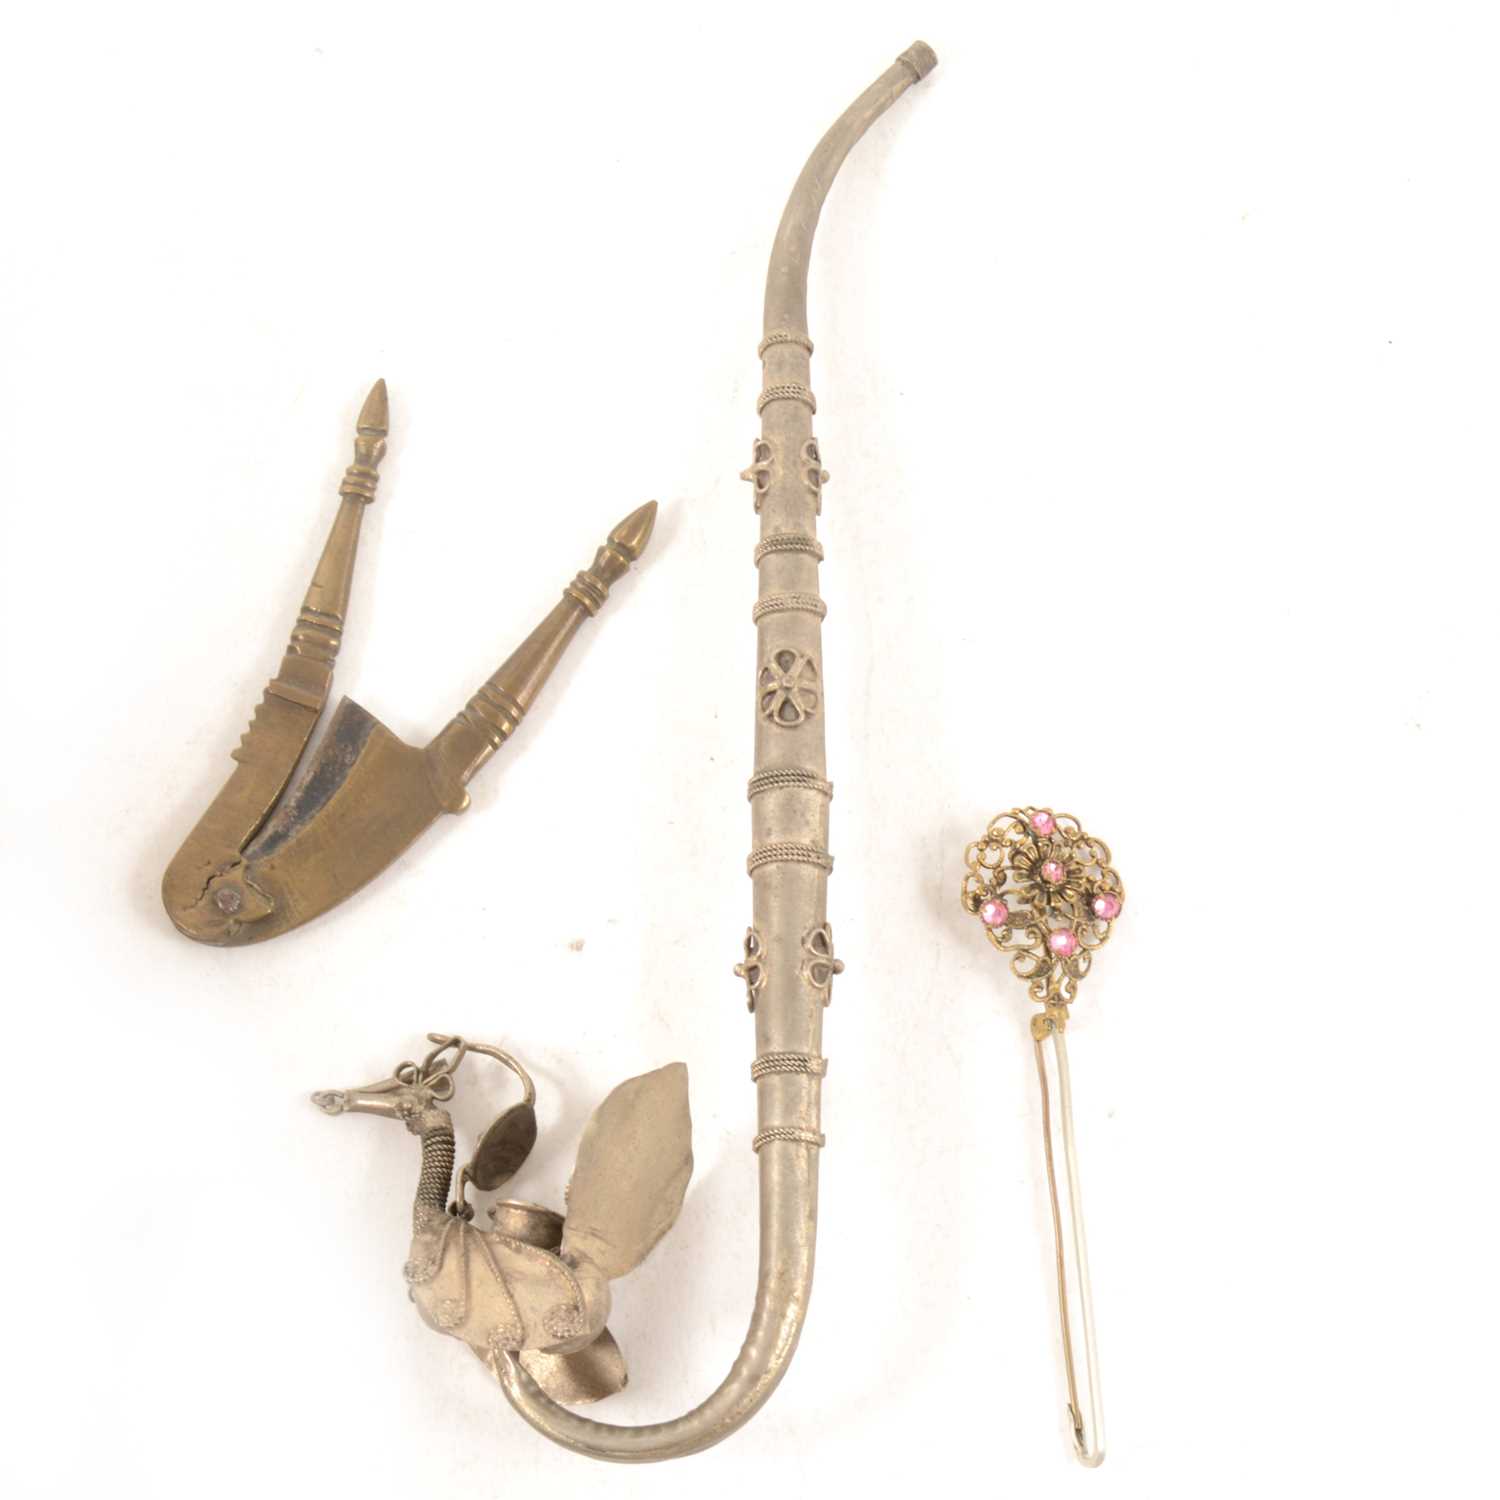 Lot 121 - 19th Century Indian Opium pipe in the form of a Peacock, a brass betelnut cutter and a pin brooch.